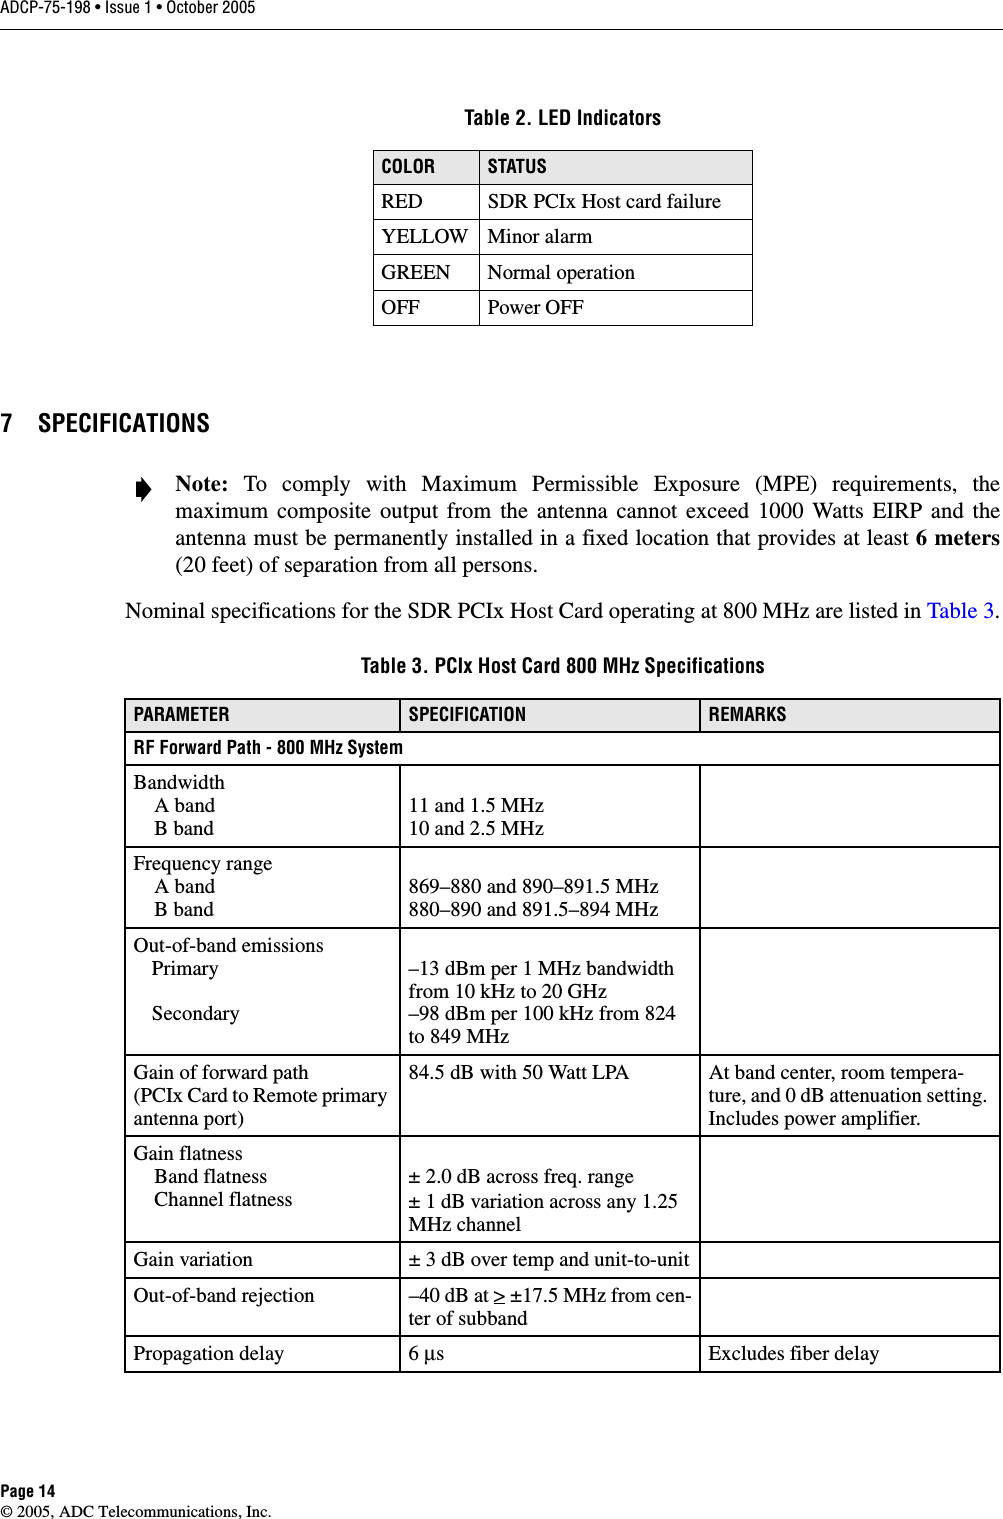 ADCP-75-198 • Issue 1 • October 2005Page 14© 2005, ADC Telecommunications, Inc.7 SPECIFICATIONSNominal specifications for the SDR PCIx Host Card operating at 800 MHz are listed in Table 3.Table 2. LED IndicatorsCOLOR STATUSRED SDR PCIx Host card failureYELLOW Minor alarmGREEN Normal operationOFF Power OFFNote:  To comply with Maximum Permissible Exposure (MPE) requirements, themaximum composite output from the antenna cannot exceed 1000 Watts EIRP and theantenna must be permanently installed in a fixed location that provides at least 6 meters(20 feet) of separation from all persons.Table 3. PCIx Host Card 800 MHz SpecificationsPARAMETER SPECIFICATION REMARKSRF Forward Path - 800 MHz SystemBandwidth    A band    B band11 and 1.5 MHz10 and 2.5 MHzFrequency range    A band    B band869–880 and 890–891.5 MHz880–890 and 891.5–894 MHzOut-of-band emissionsPrimarySecondary–13 dBm per 1 MHz bandwidth from 10 kHz to 20 GHz–98 dBm per 100 kHz from 824 to 849 MHzGain of forward path(PCIx Card to Remote primary antenna port)84.5 dB with 50 Watt LPA At band center, room tempera-ture, and 0 dB attenuation setting. Includes power amplifier.Gain flatness    Band flatness    Channel flatness± 2.0 dB across freq. range± 1 dB variation across any 1.25 MHz channelGain variation ± 3 dB over temp and unit-to-unitOut-of-band rejection –40 dB at &gt; ±17.5 MHz from cen-ter of subbandPropagation delay 6 µs Excludes fiber delay